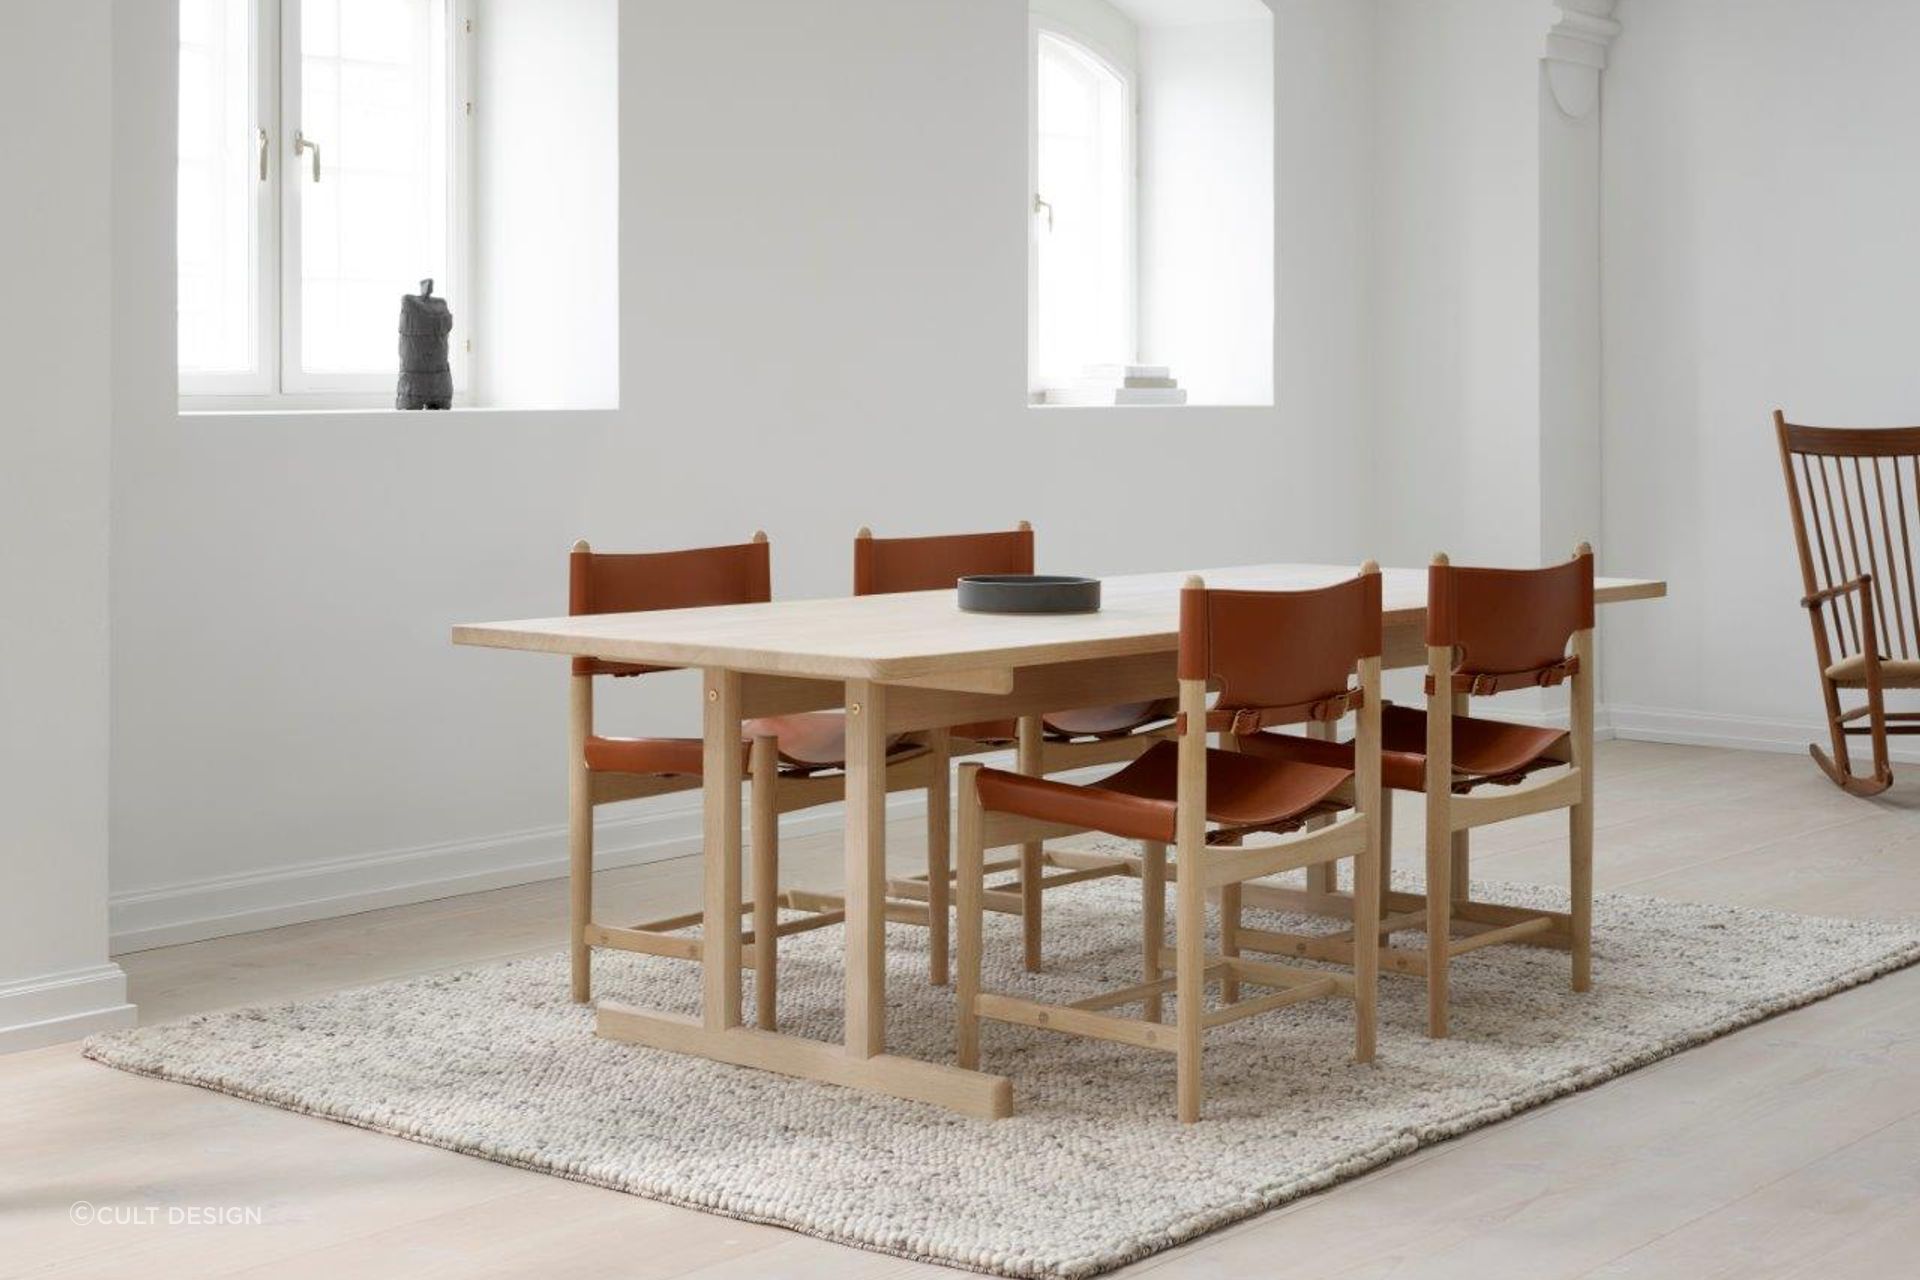 Having a rug that's the same shape as the dining table can help keep the interior design of a room consistent. Featured product: 6286 Dining Table.